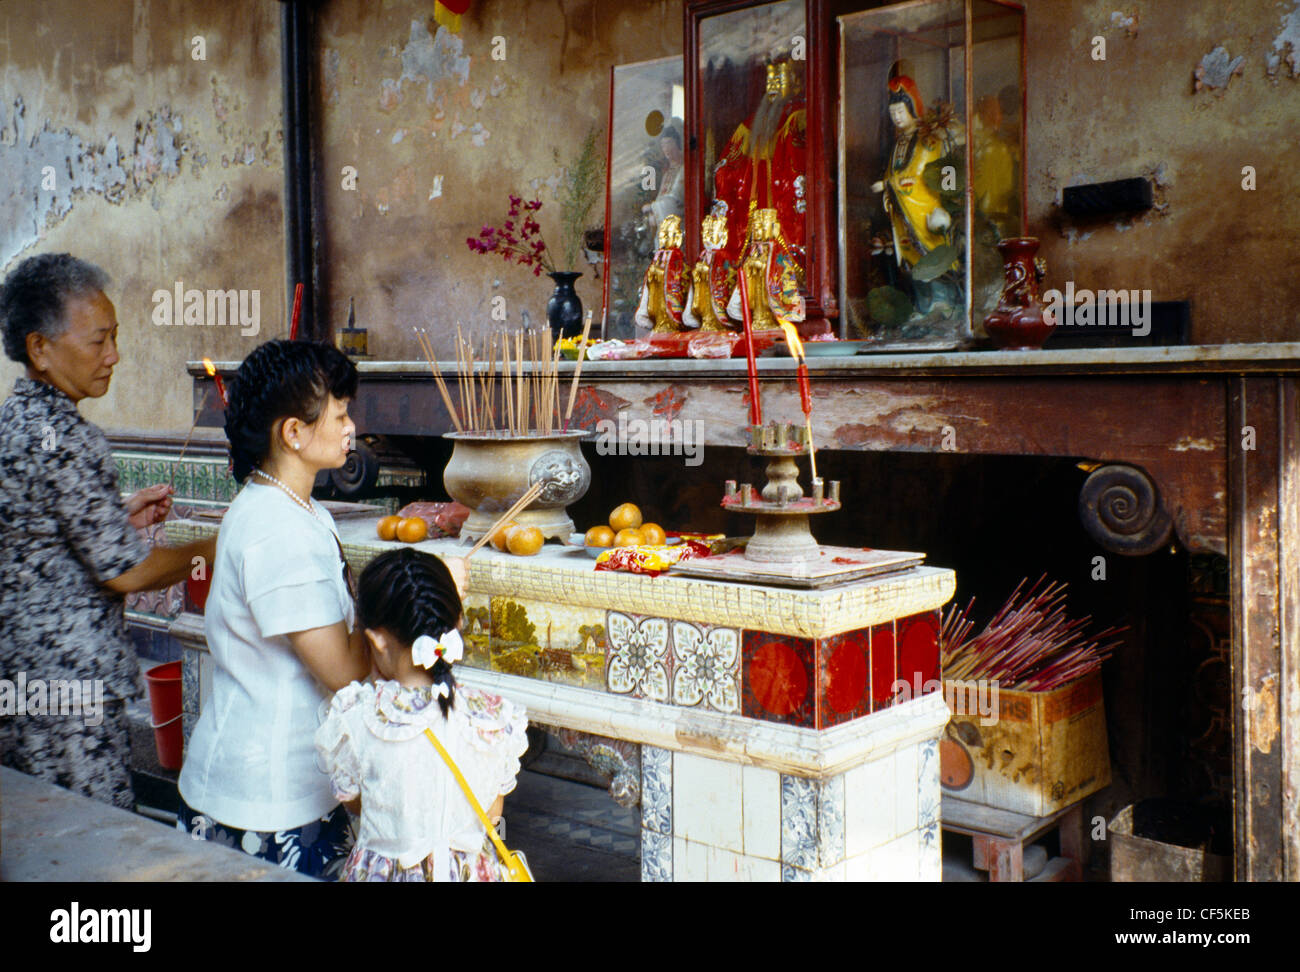 Singapore Chinese Temple People Praying Three Generations Making Offerings Stock Photo